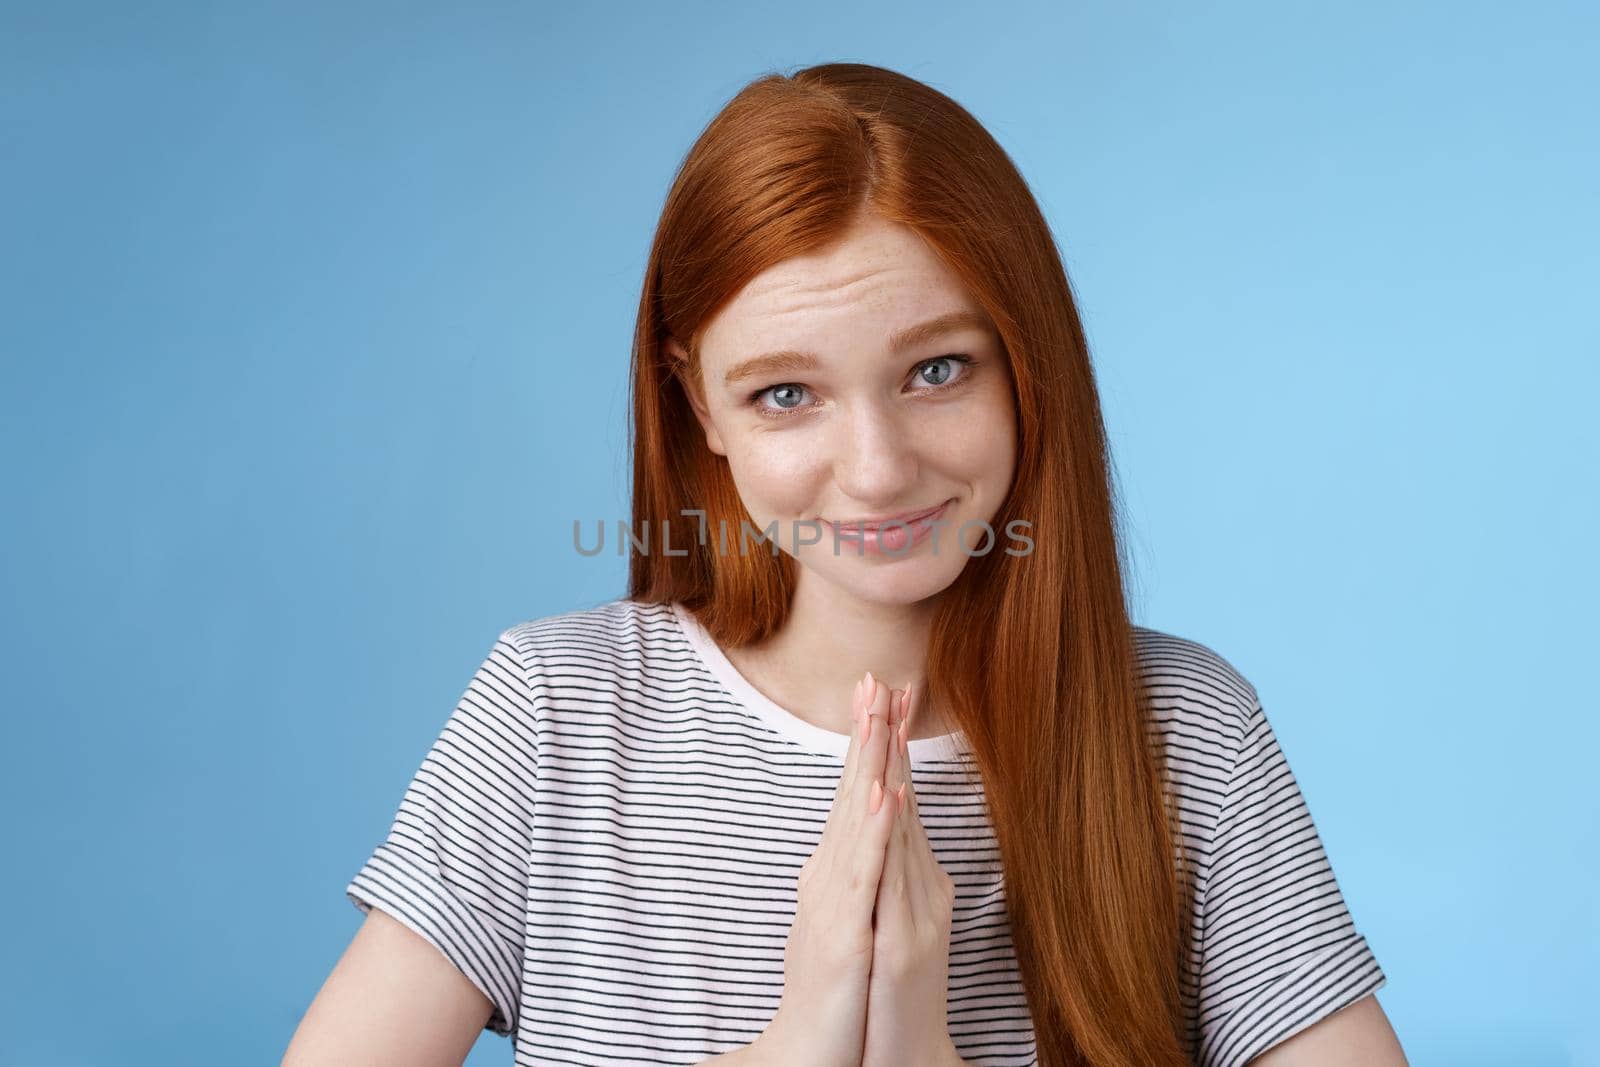 Cute girl acting kind angel gazing camera silly smiling asking please help press palms together pray glancing flirty begging favour standing blue background pleading sincere lend clothes. Lifestyle.